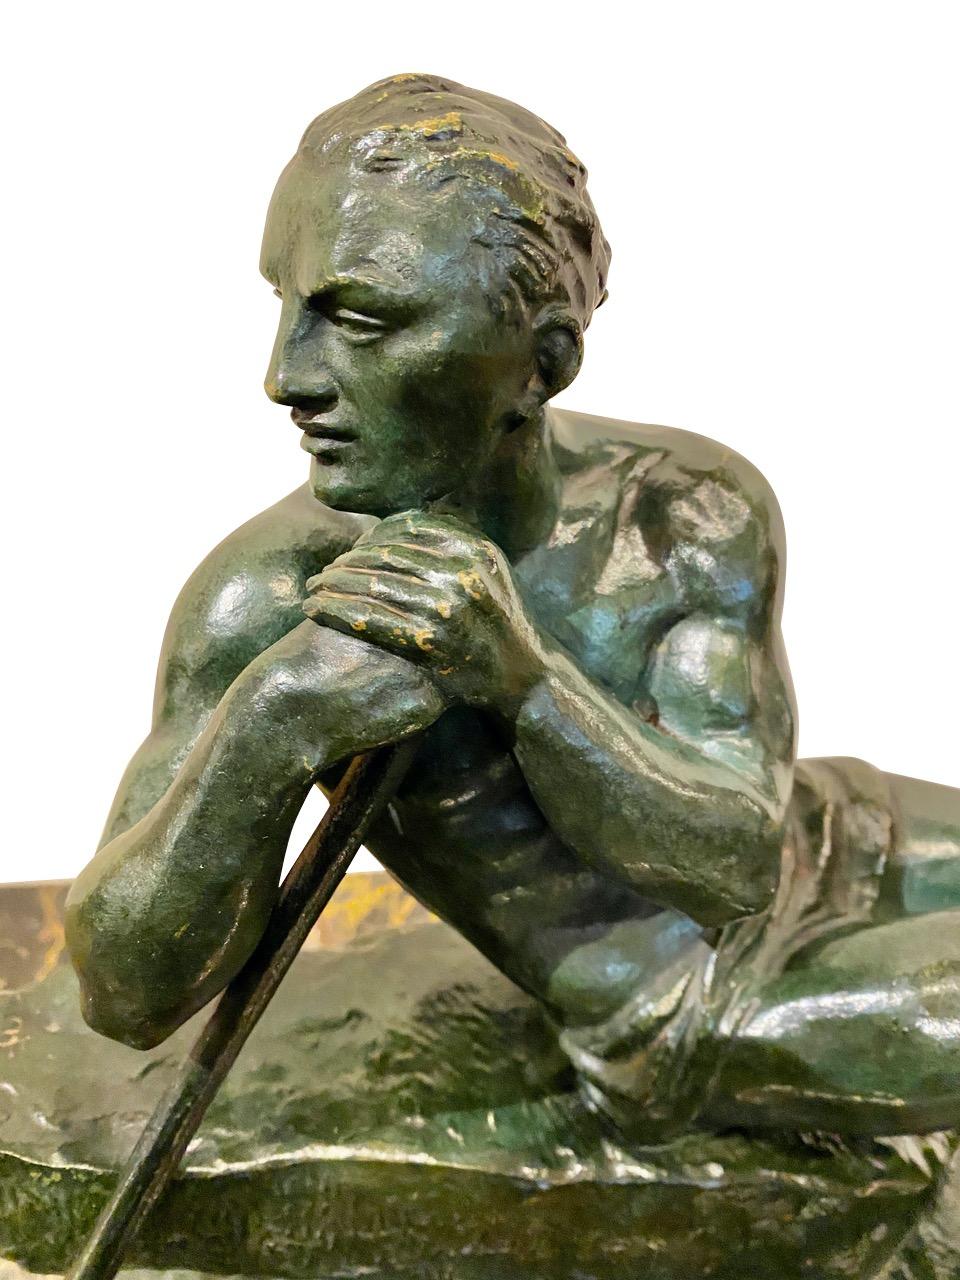 Pierre Le Faguays, French sculptor male figure in green patinated bronze. Modeled as a man wearing a loincloth and leaning on a pole. Tremendous details, unusual texture portrayed in a form rarely seen in his Art Deco sculptures. Signed P Le Faguays